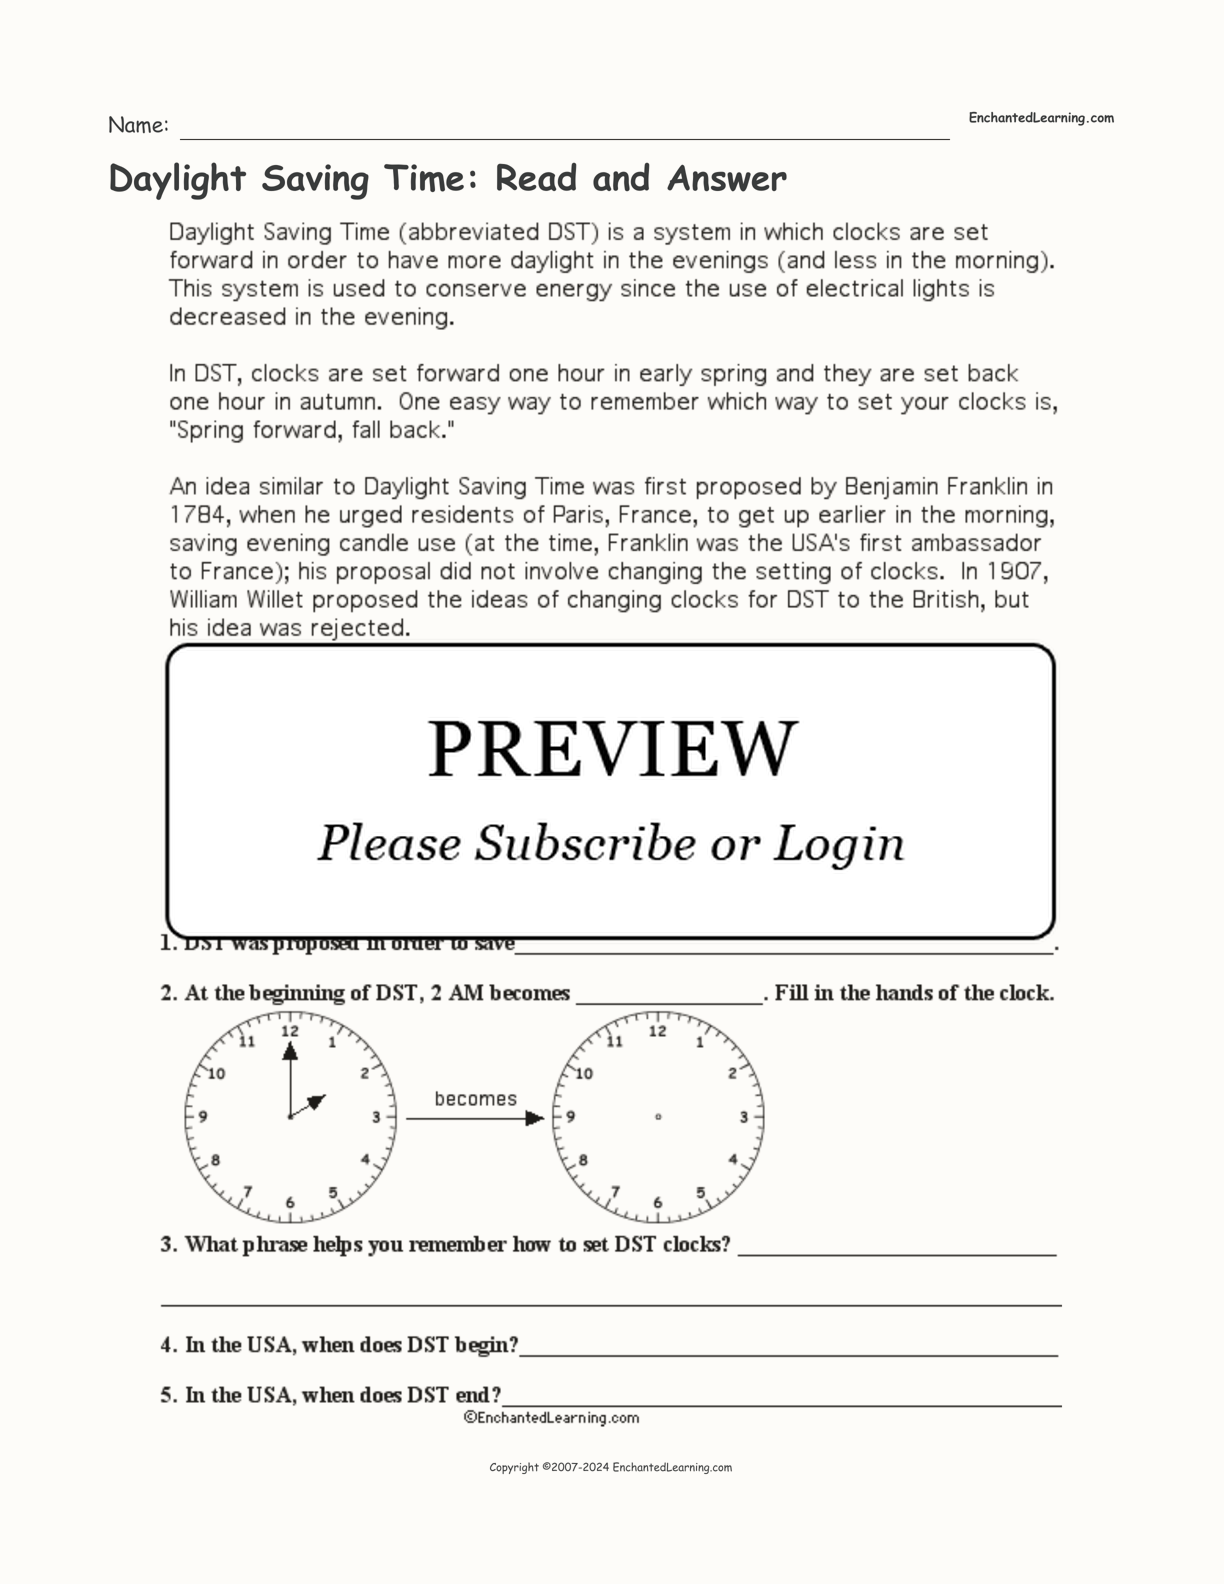 Daylight Saving Time: Read and Answer interactive worksheet page 1